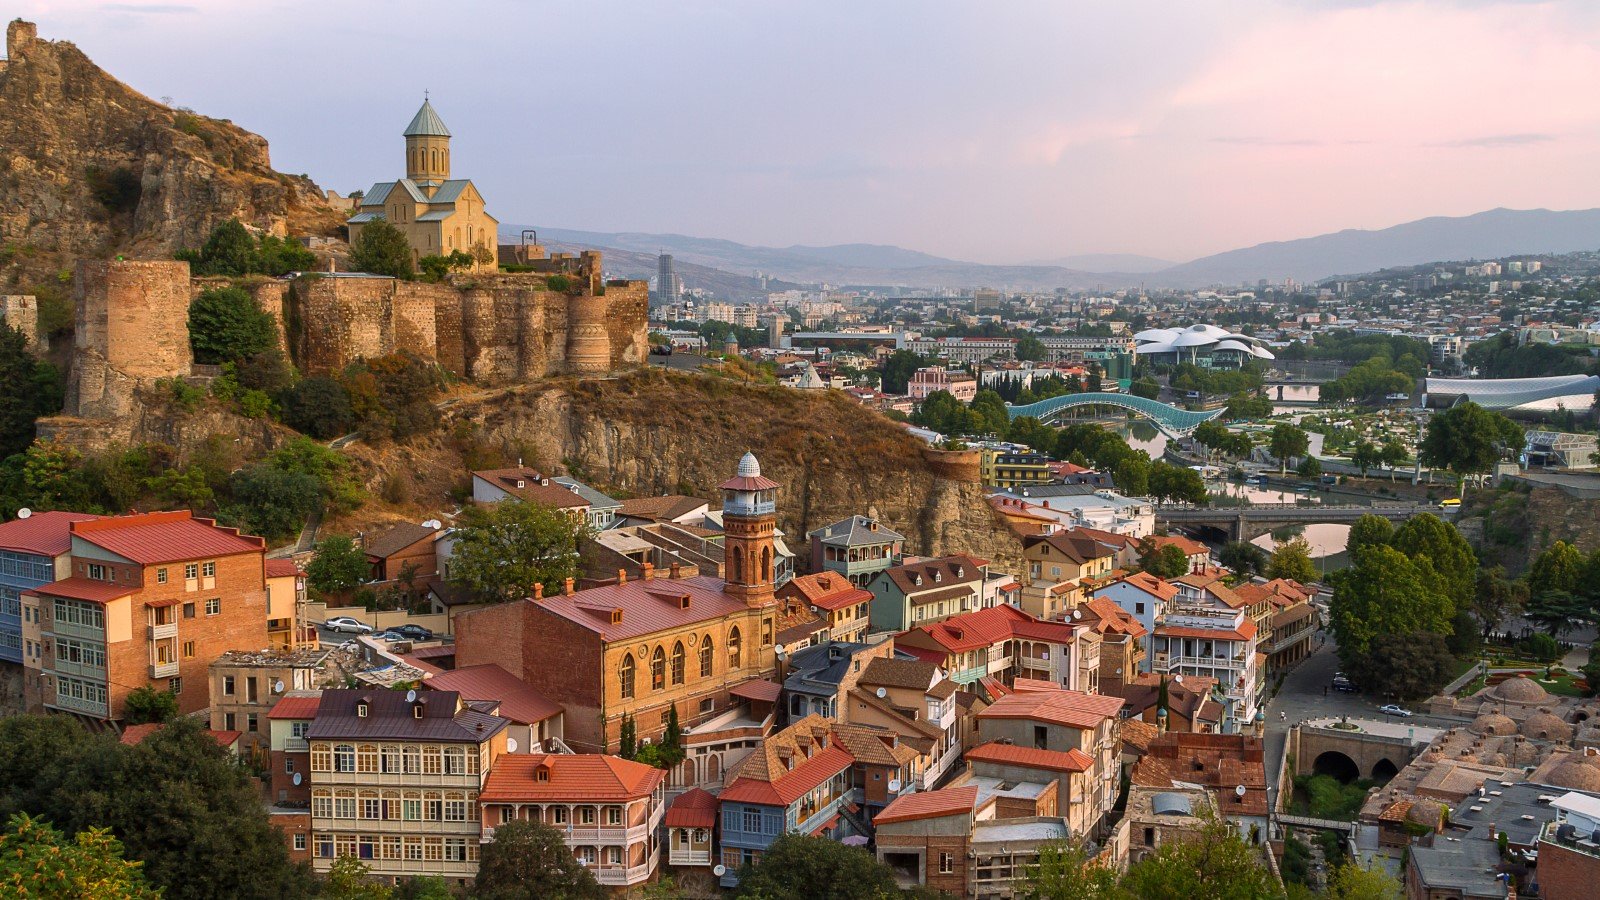 <p>Nestled between the borders of Europe and Asia, Georgia has come a long way in the last twenty years. Voted the world’s #1 economic reformer in 2007 and consistently ranking well on the Ease of Doing Business index, it is a country worth investing in.</p>